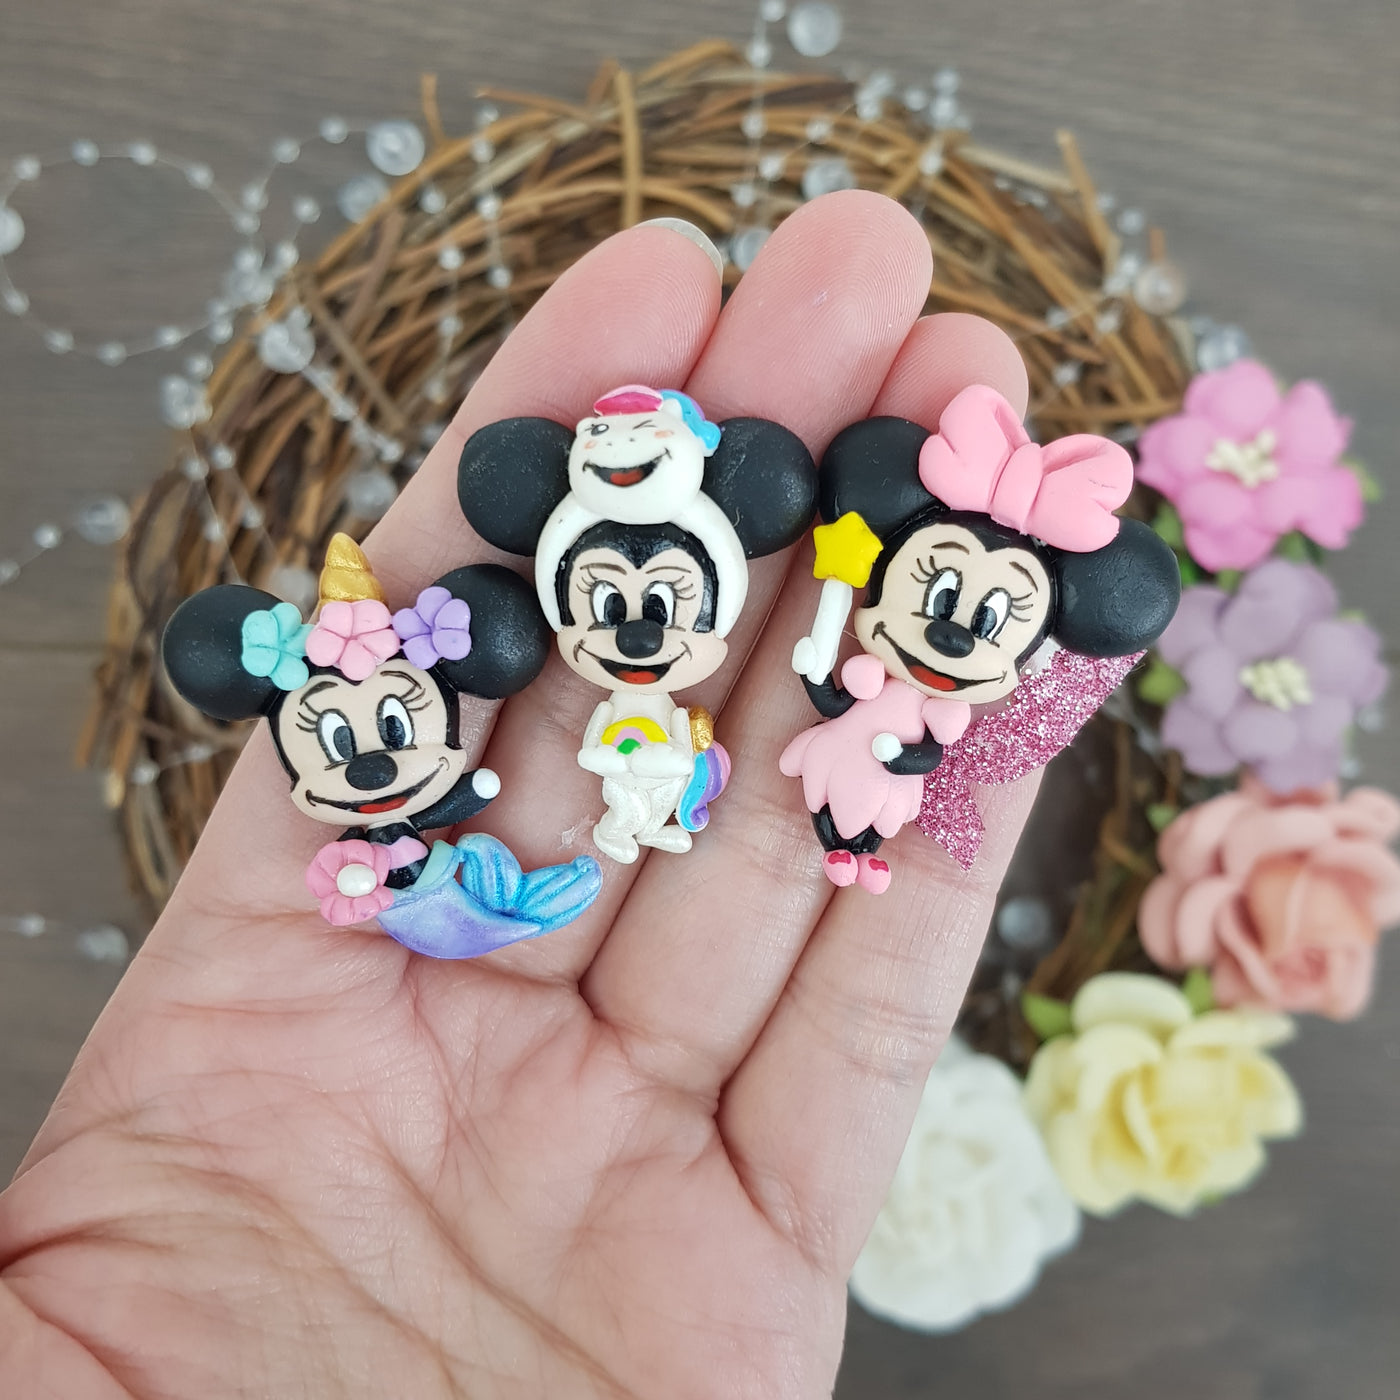 Magical mouse girl - Embellishment Clay Bow Centre